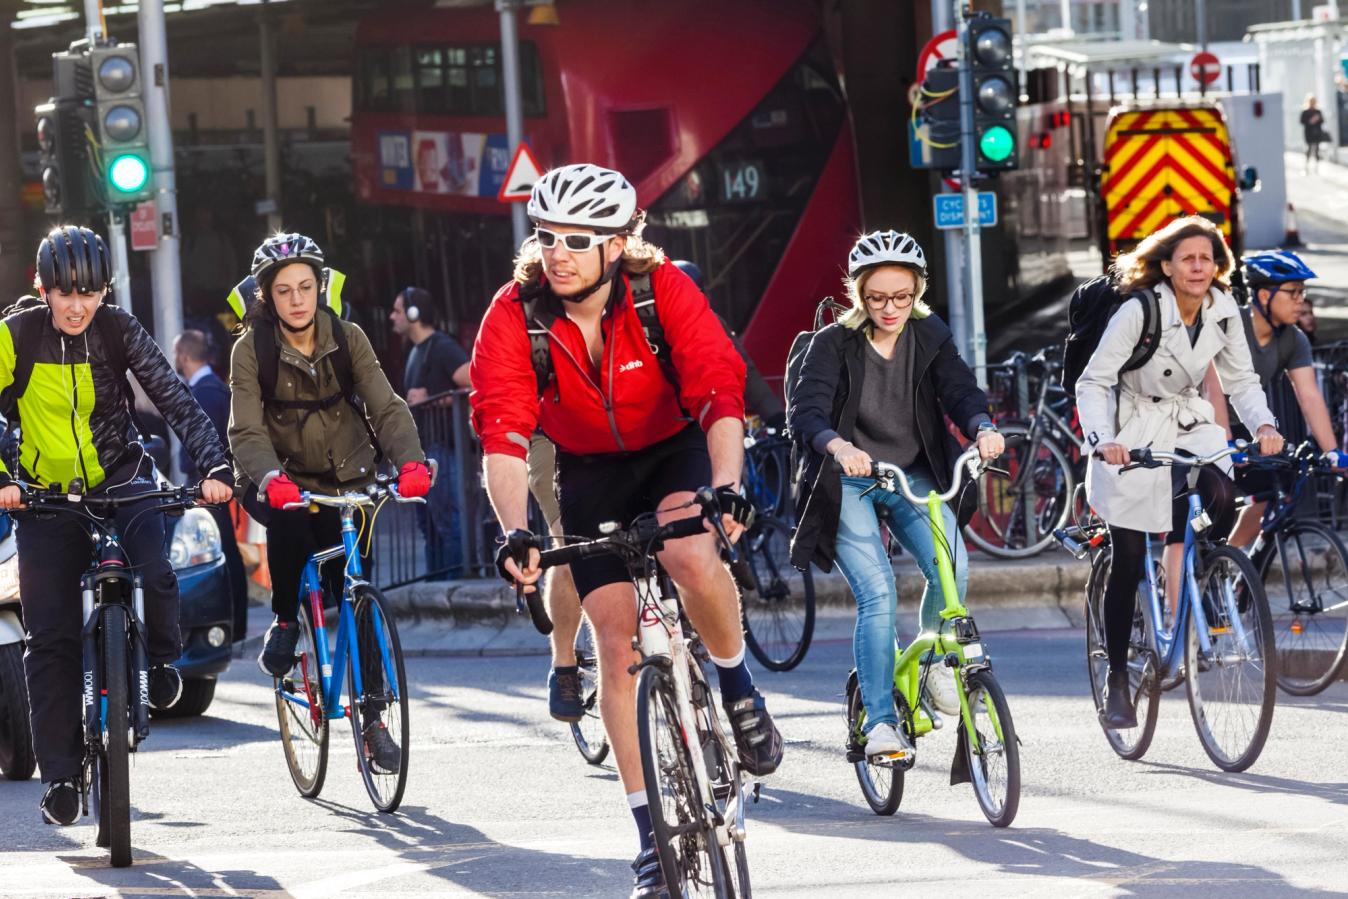 You can ride to work in the clothes or cycling gear you already own